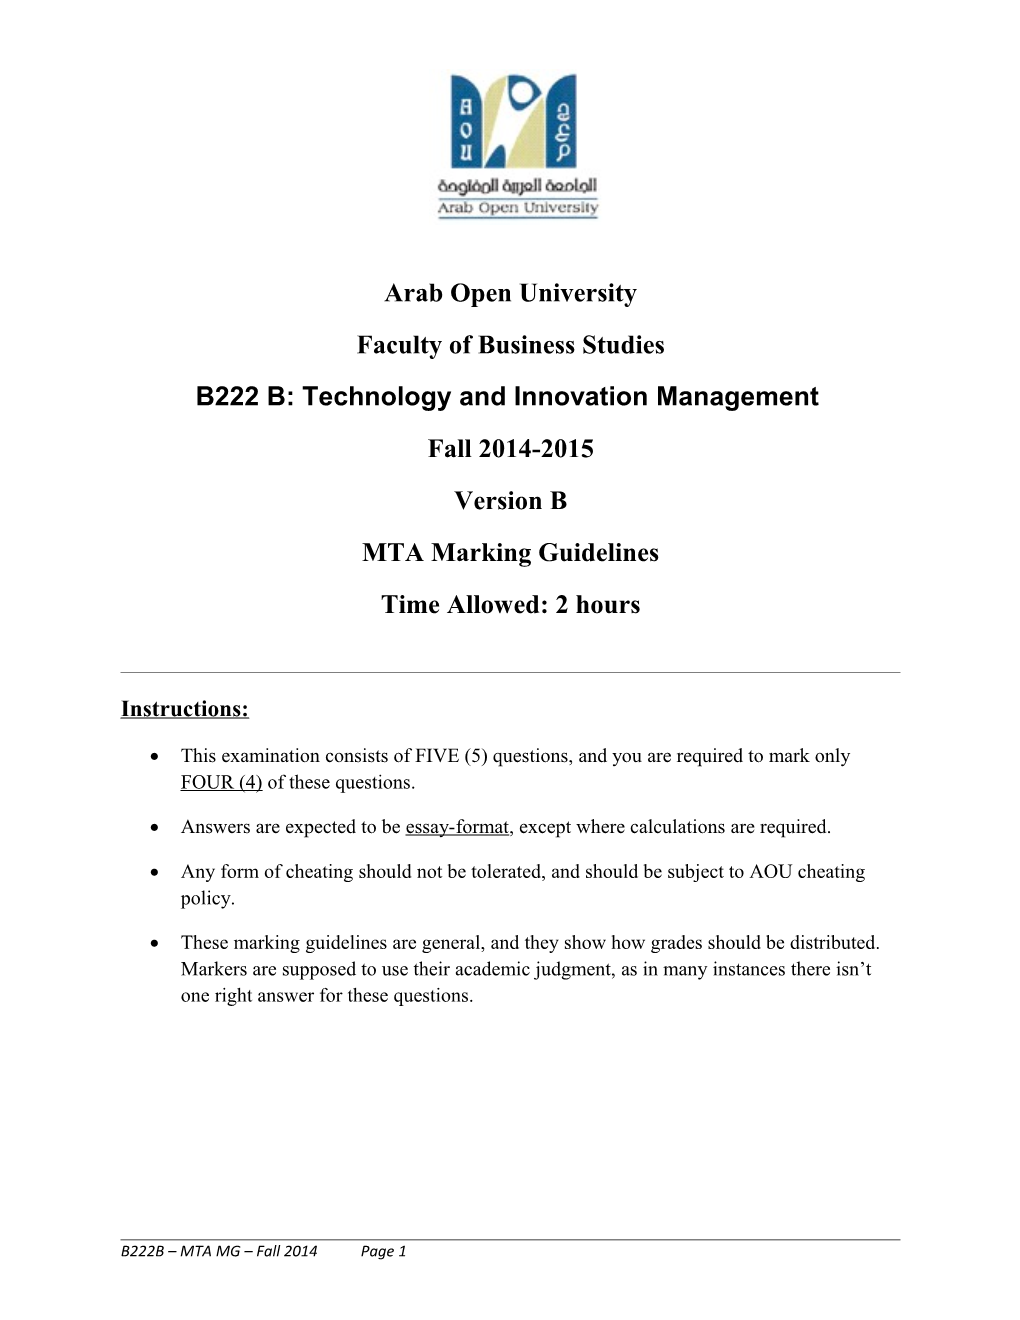 B222 B: Technology and Innovation Management